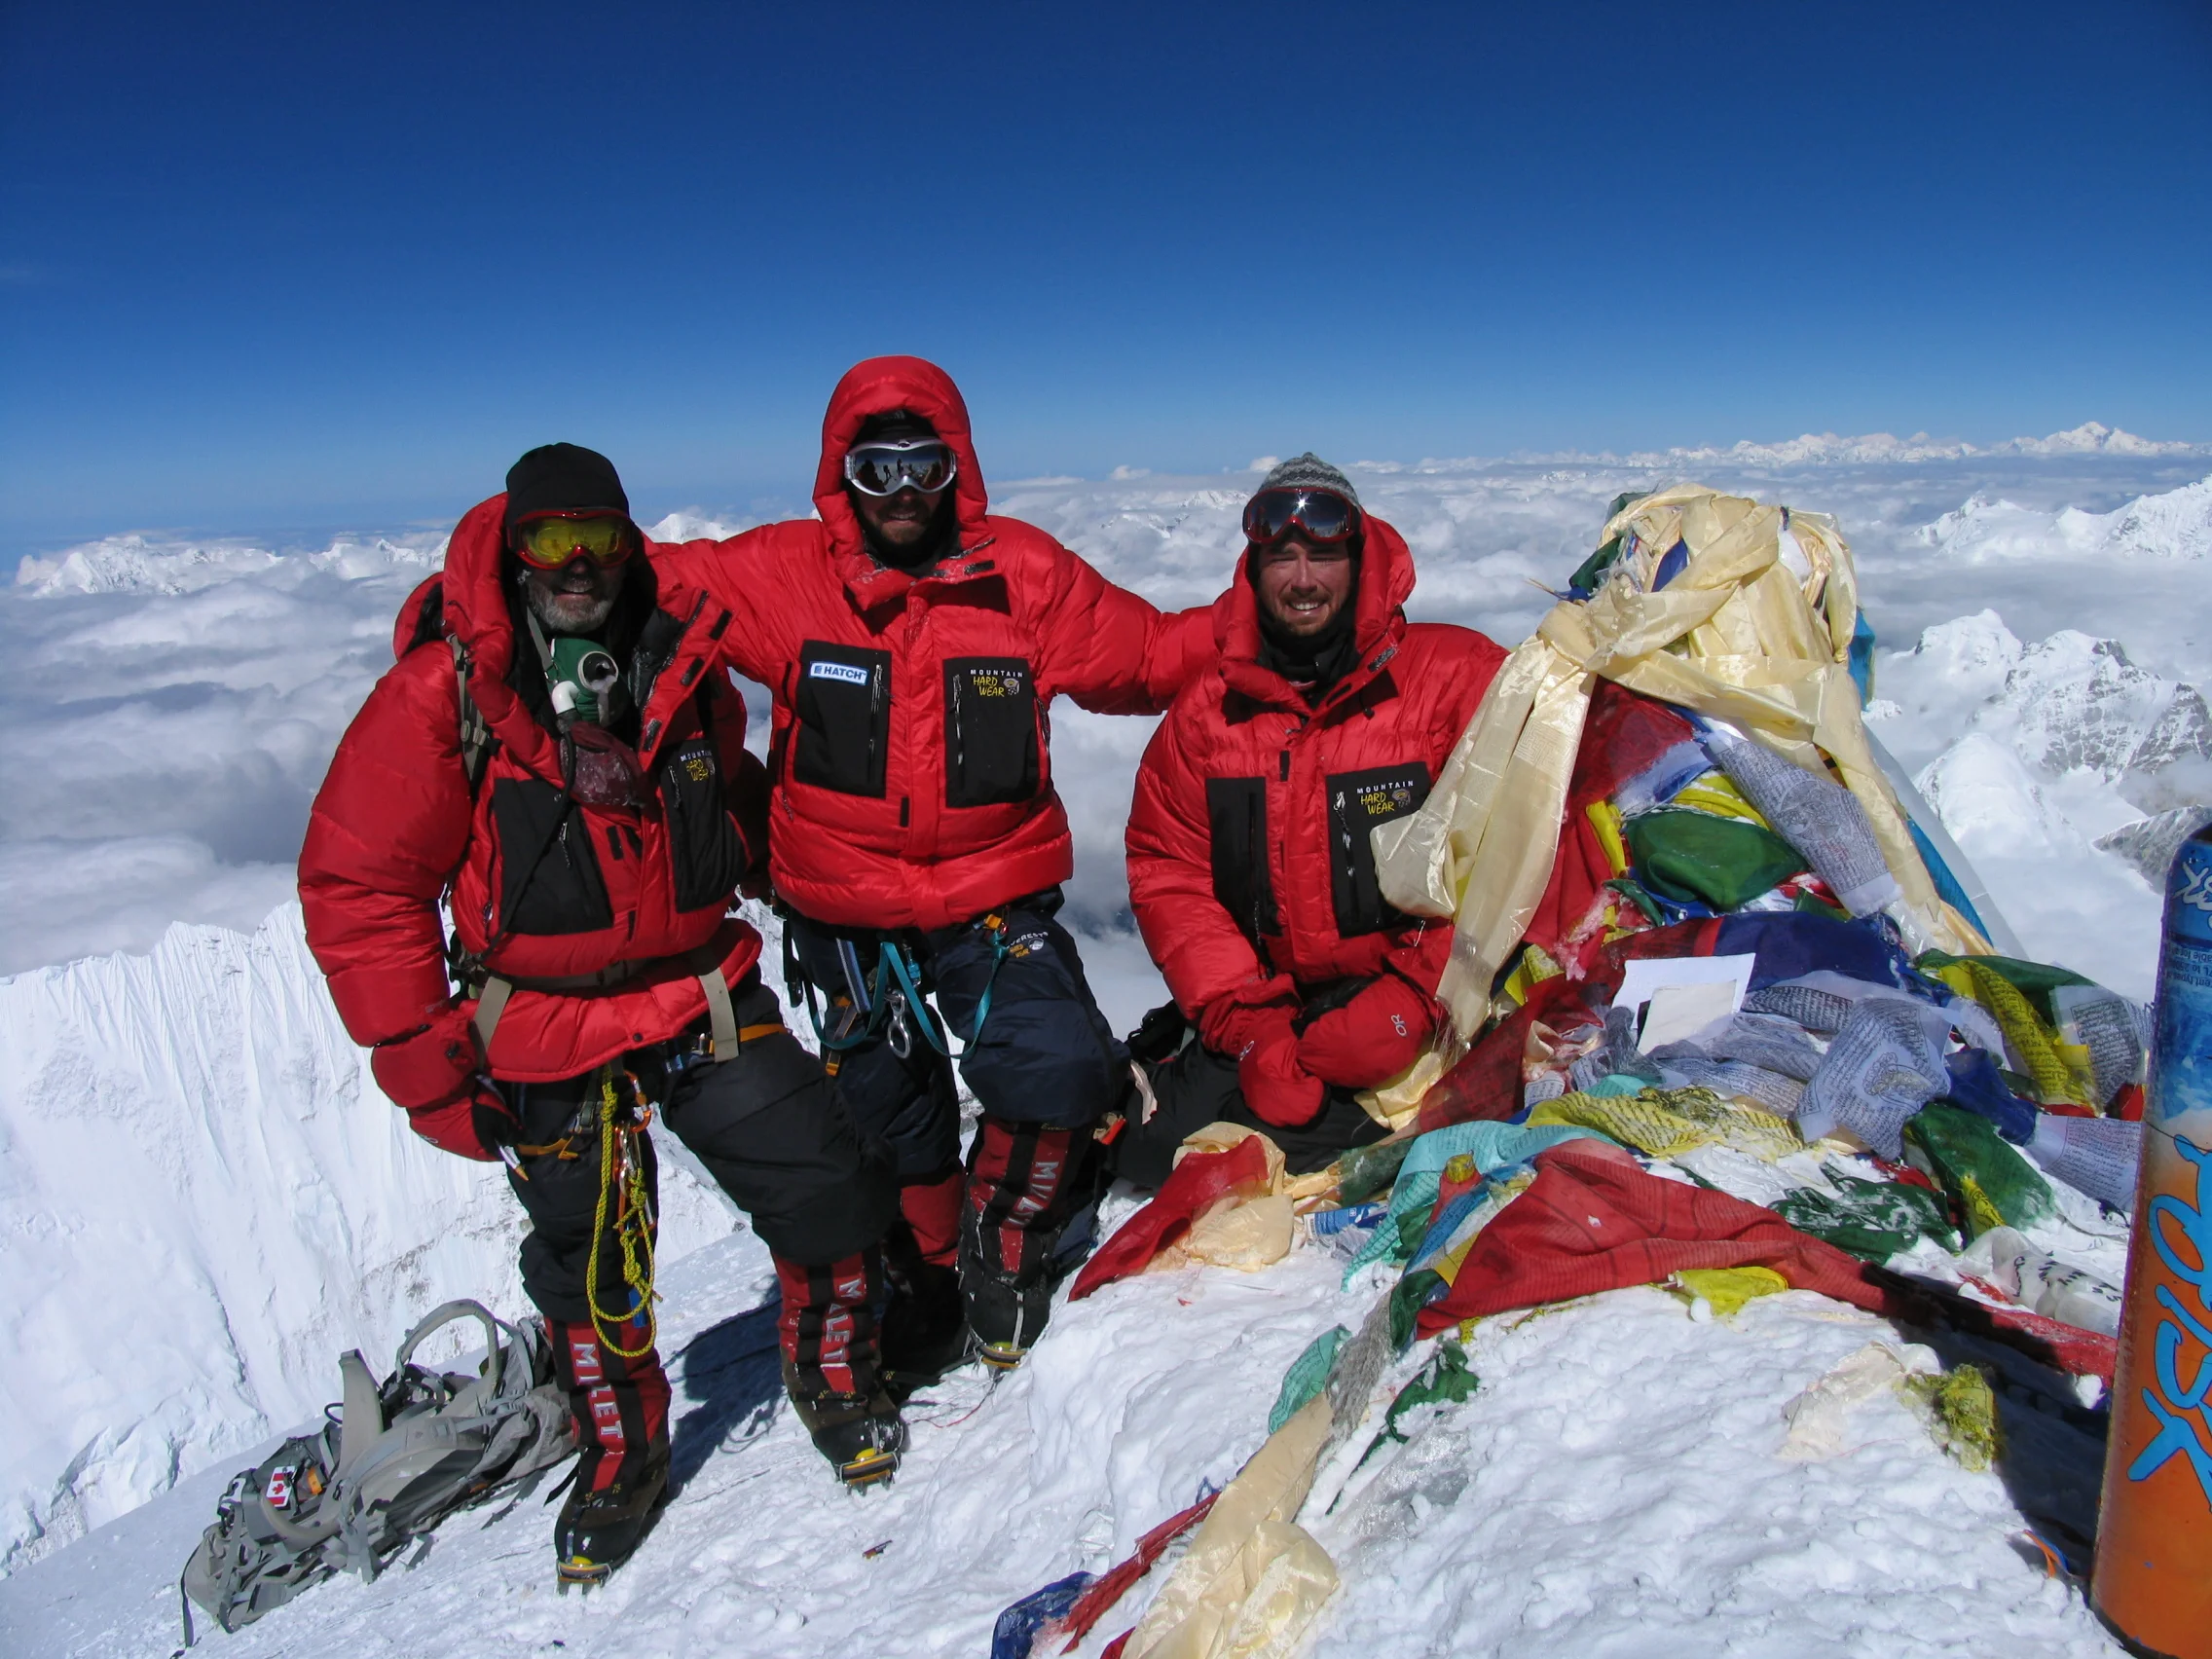 Alan Mallory with Family on Summit of Mount Everest